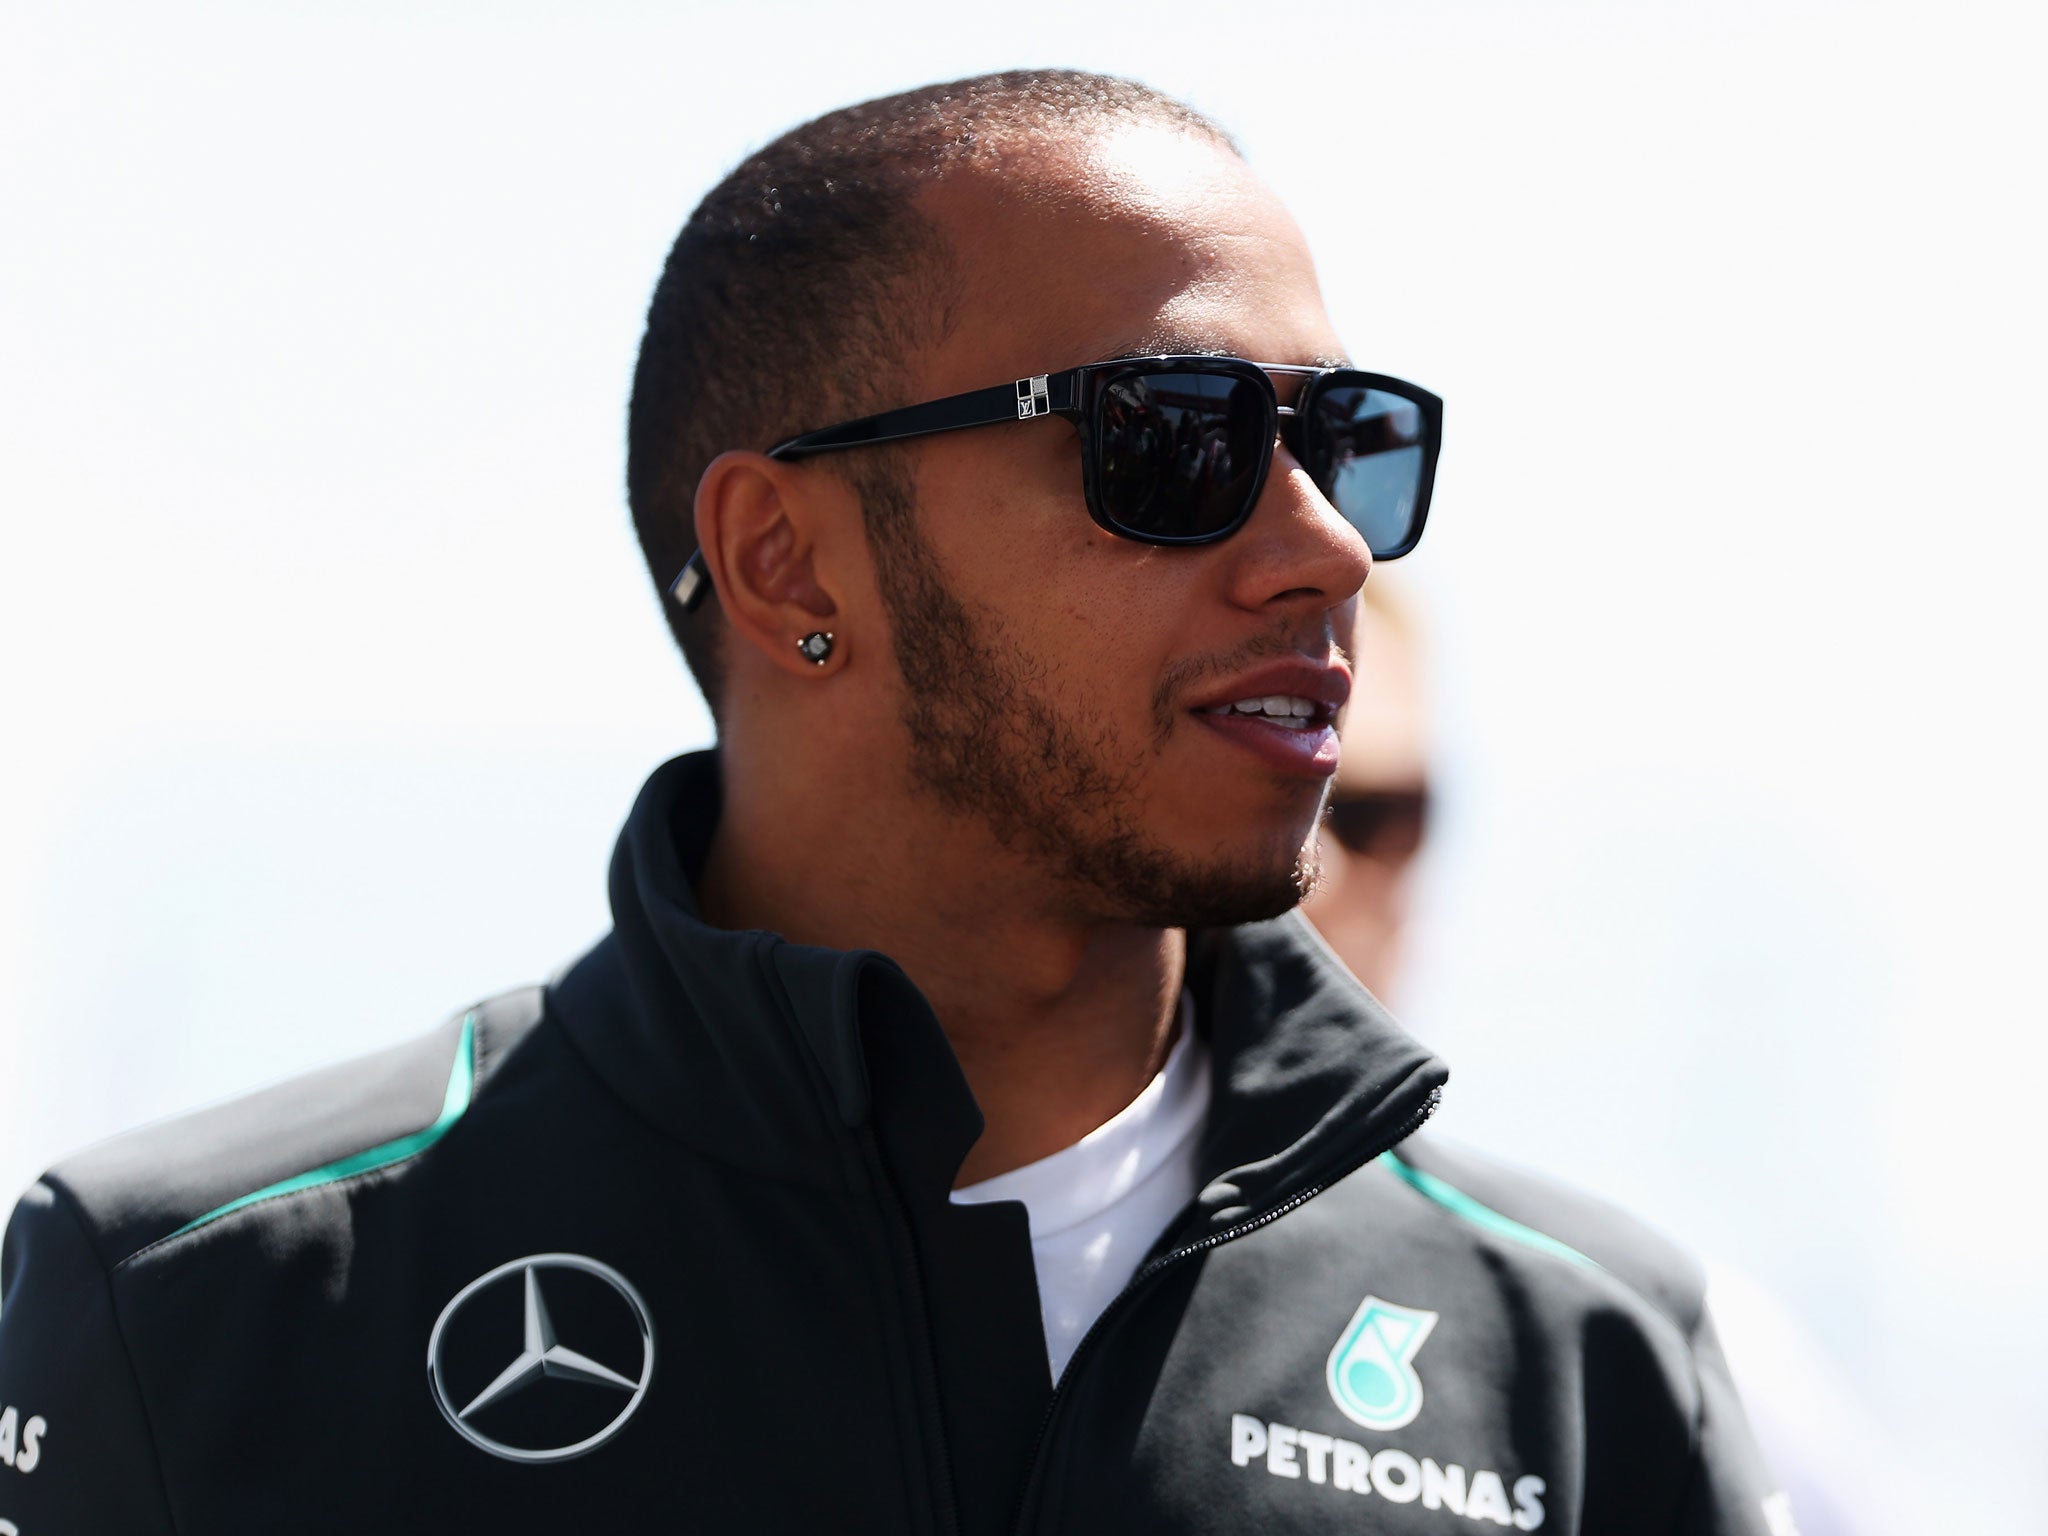 Lewis Hamilton is currently cutting a gloomy figure at Mercedes